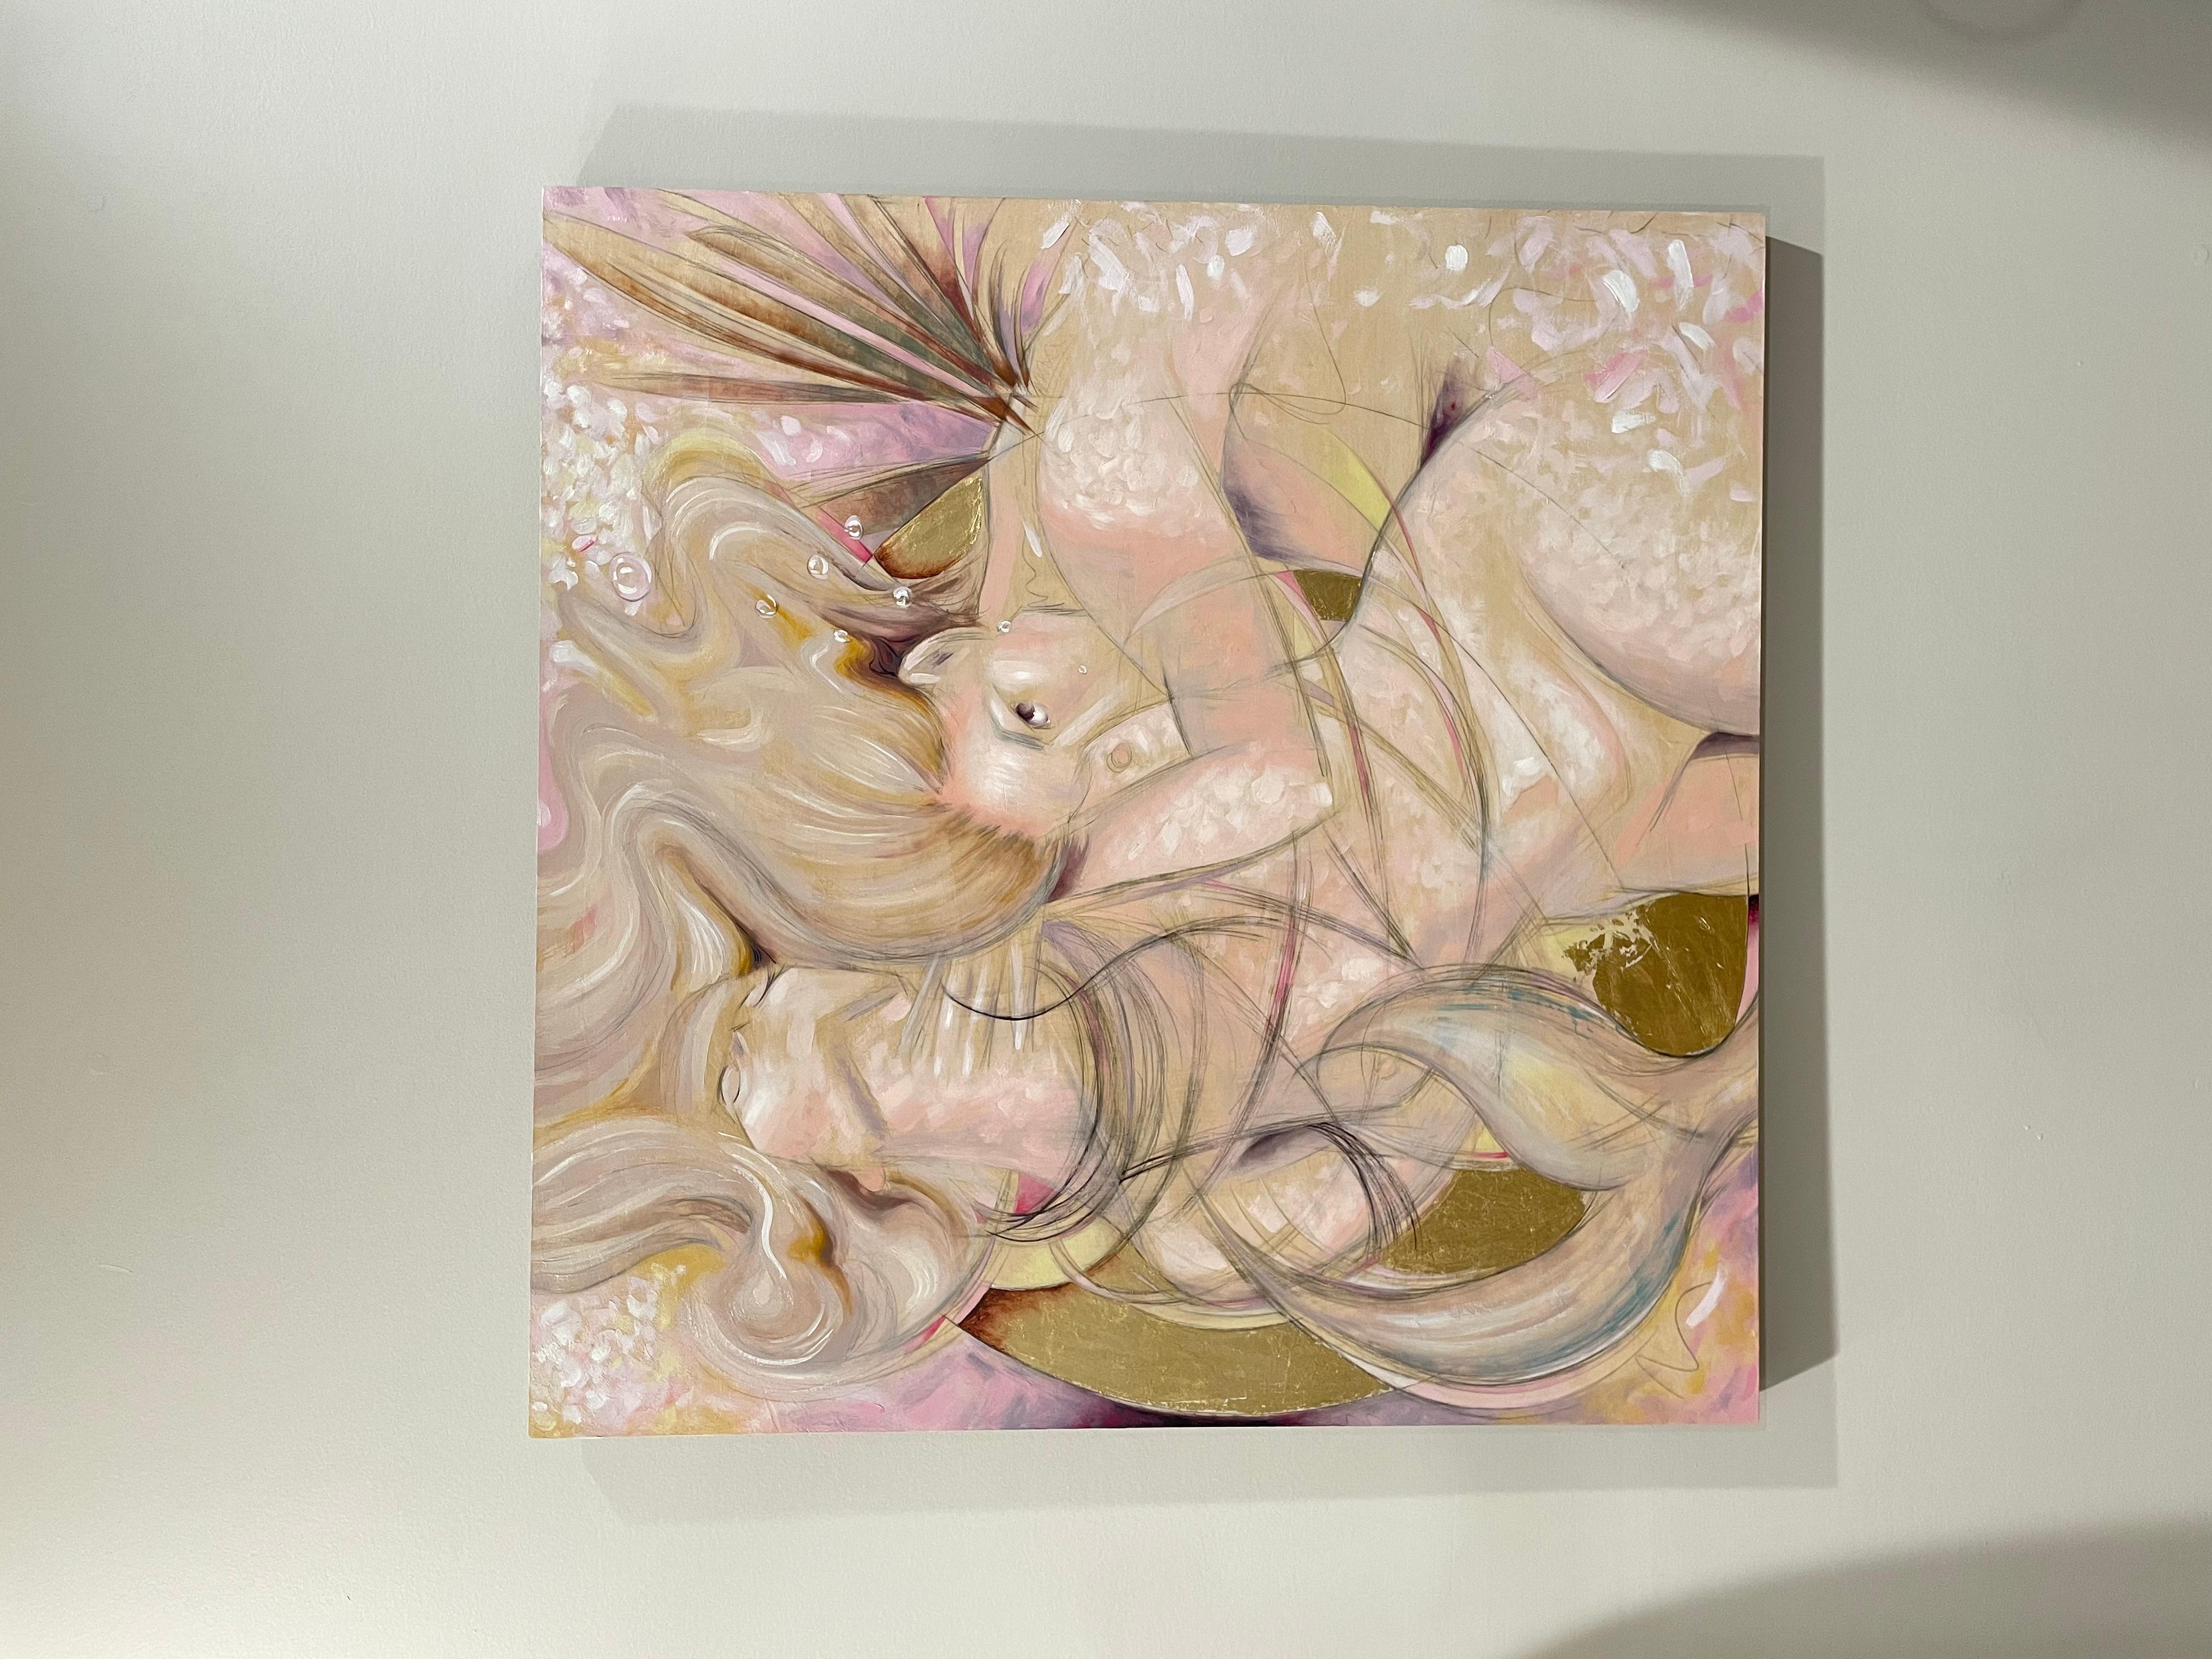 <p>Artist Comments<br>Two mythological figures appear in an underwater realm. The siren symbolizes the internal struggles that humans grapple with. The artwork serves as a visual representation of artist Sumner Crenshaw's journey with mental health,